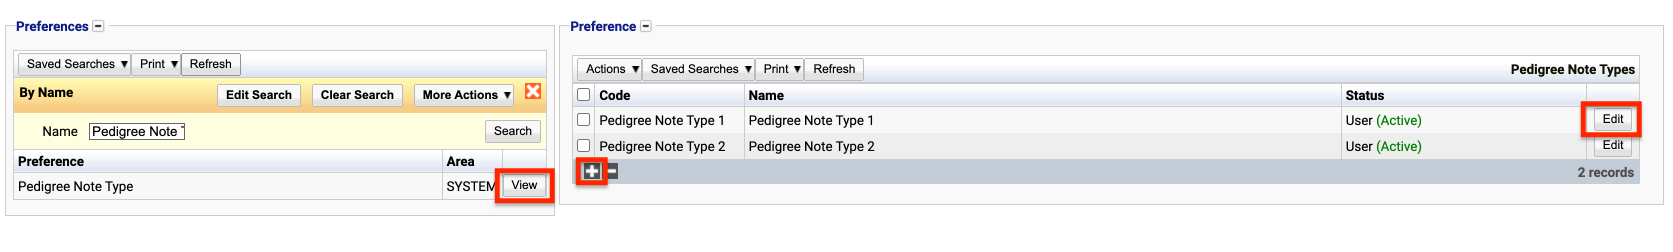 Finding the pedigree note type in the preference list.